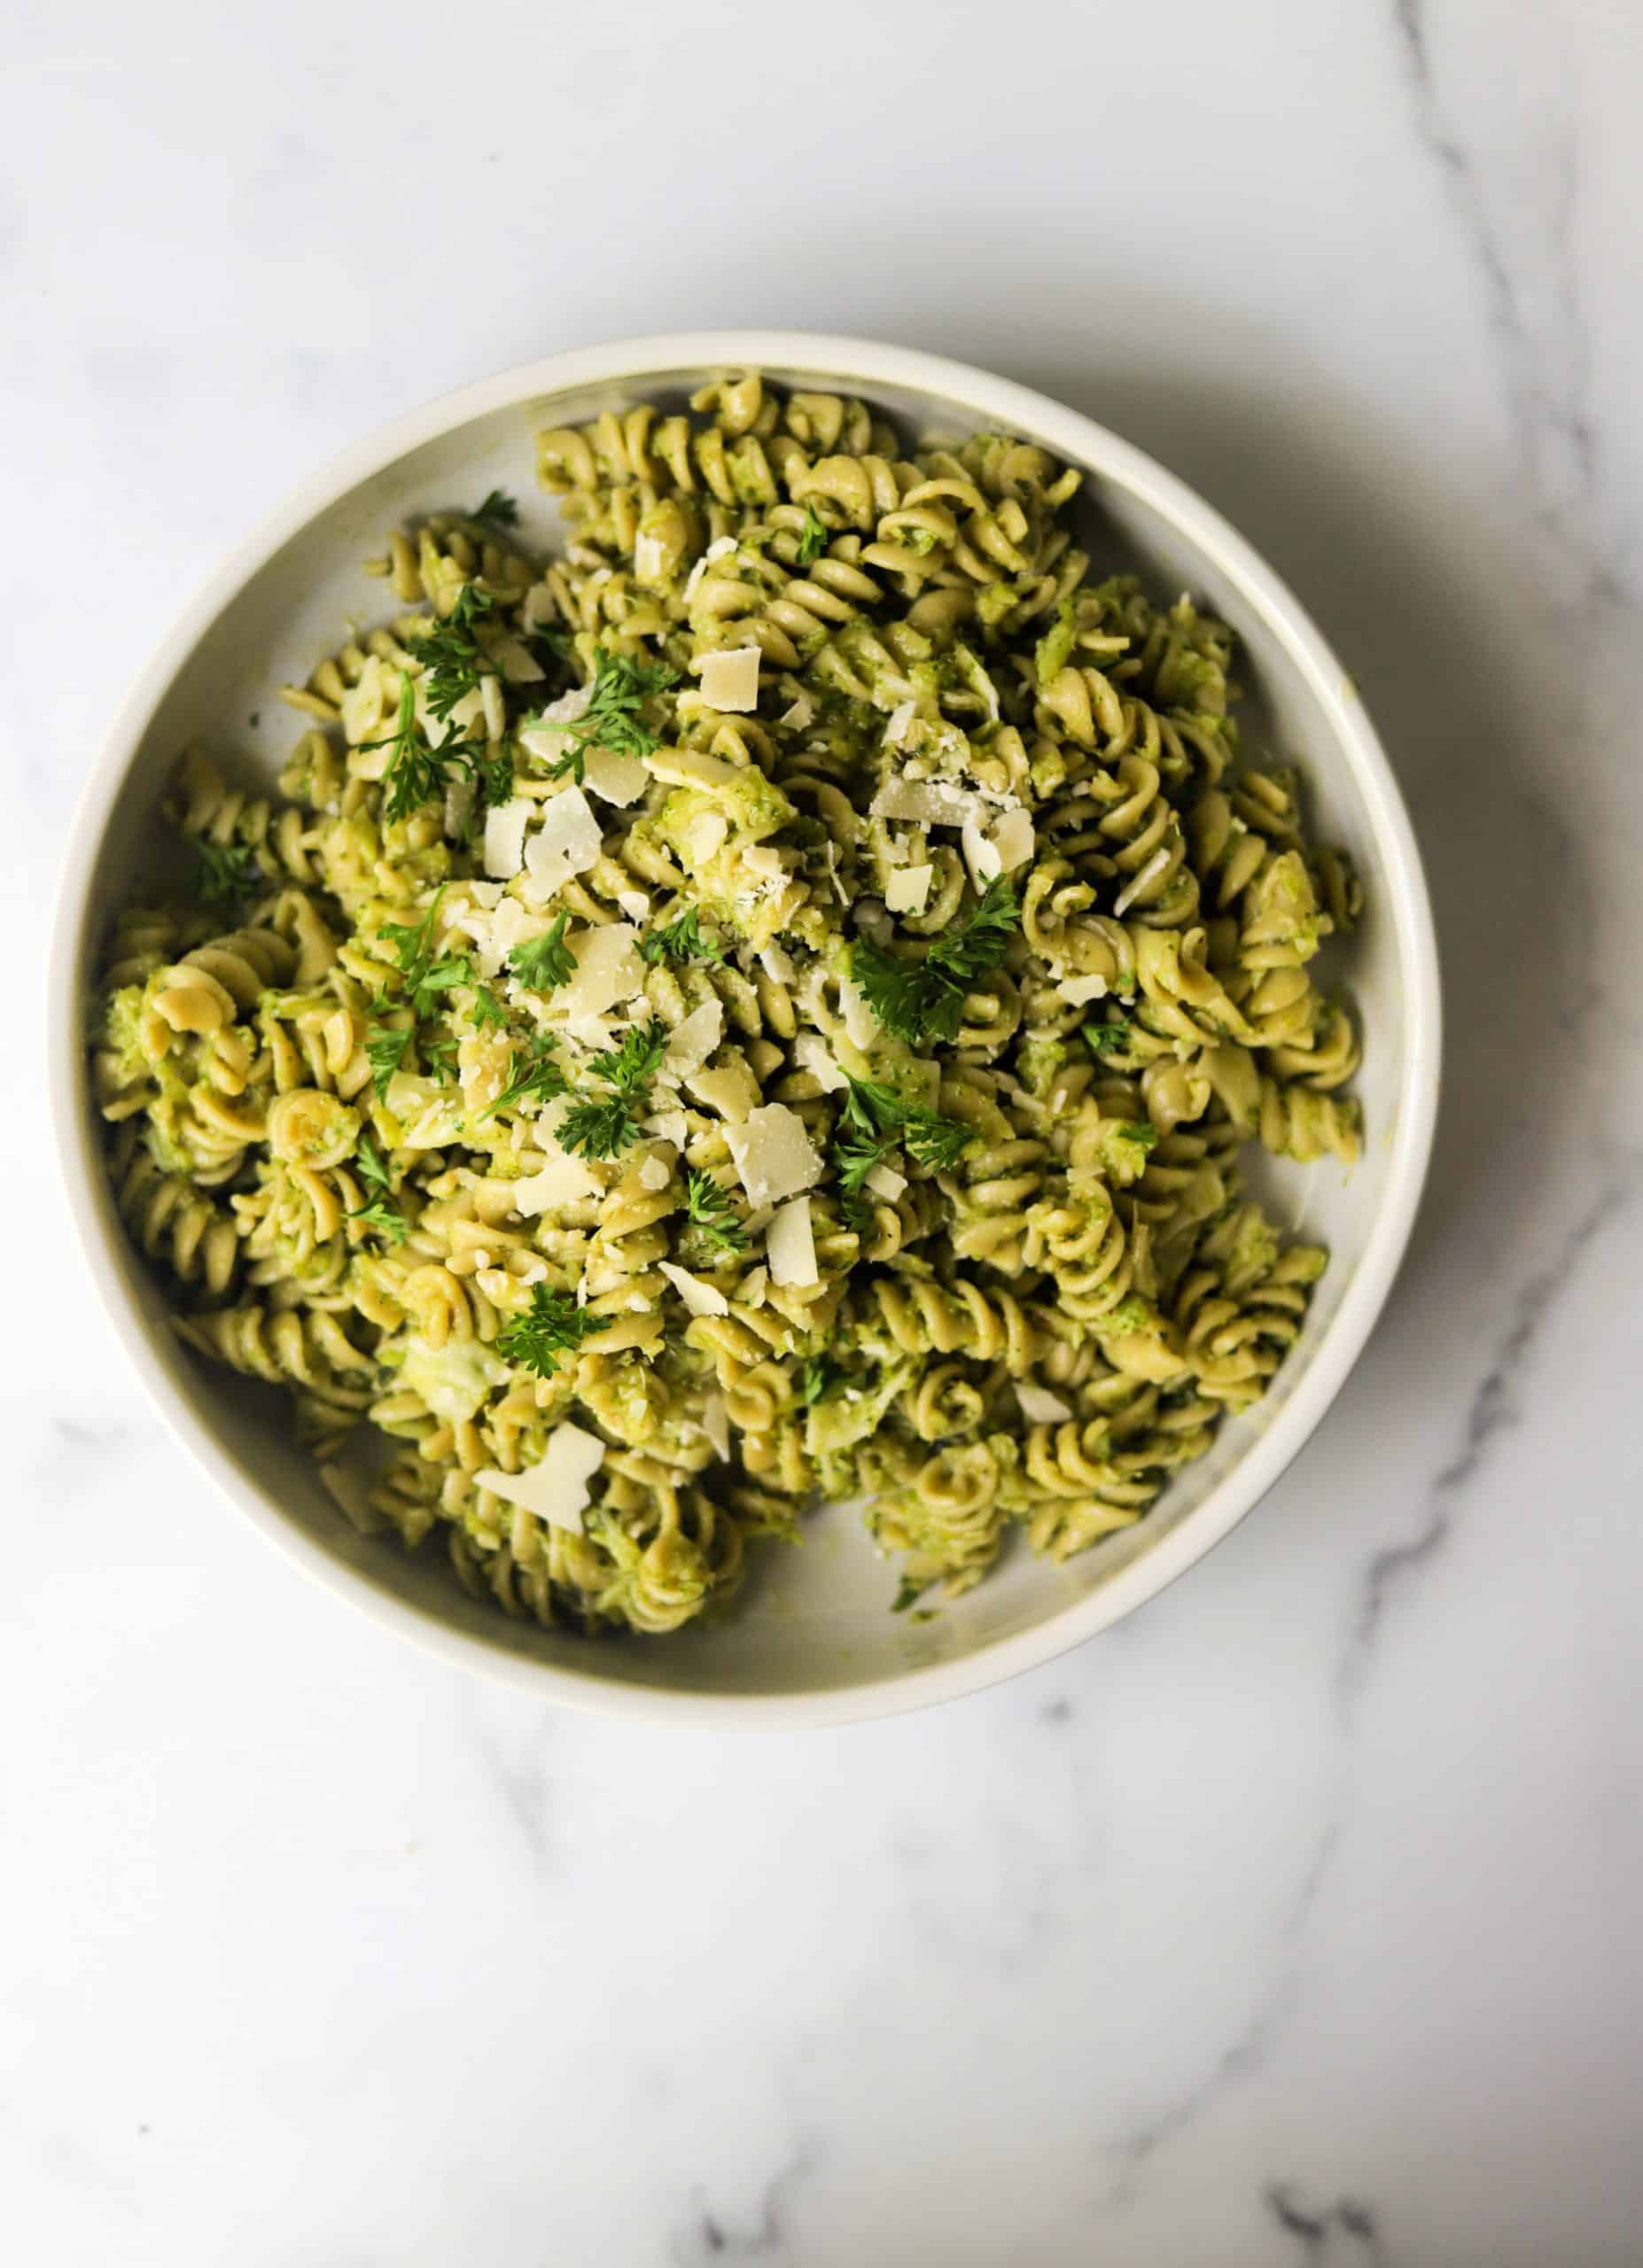 A white bowl filled with broccol pesto.